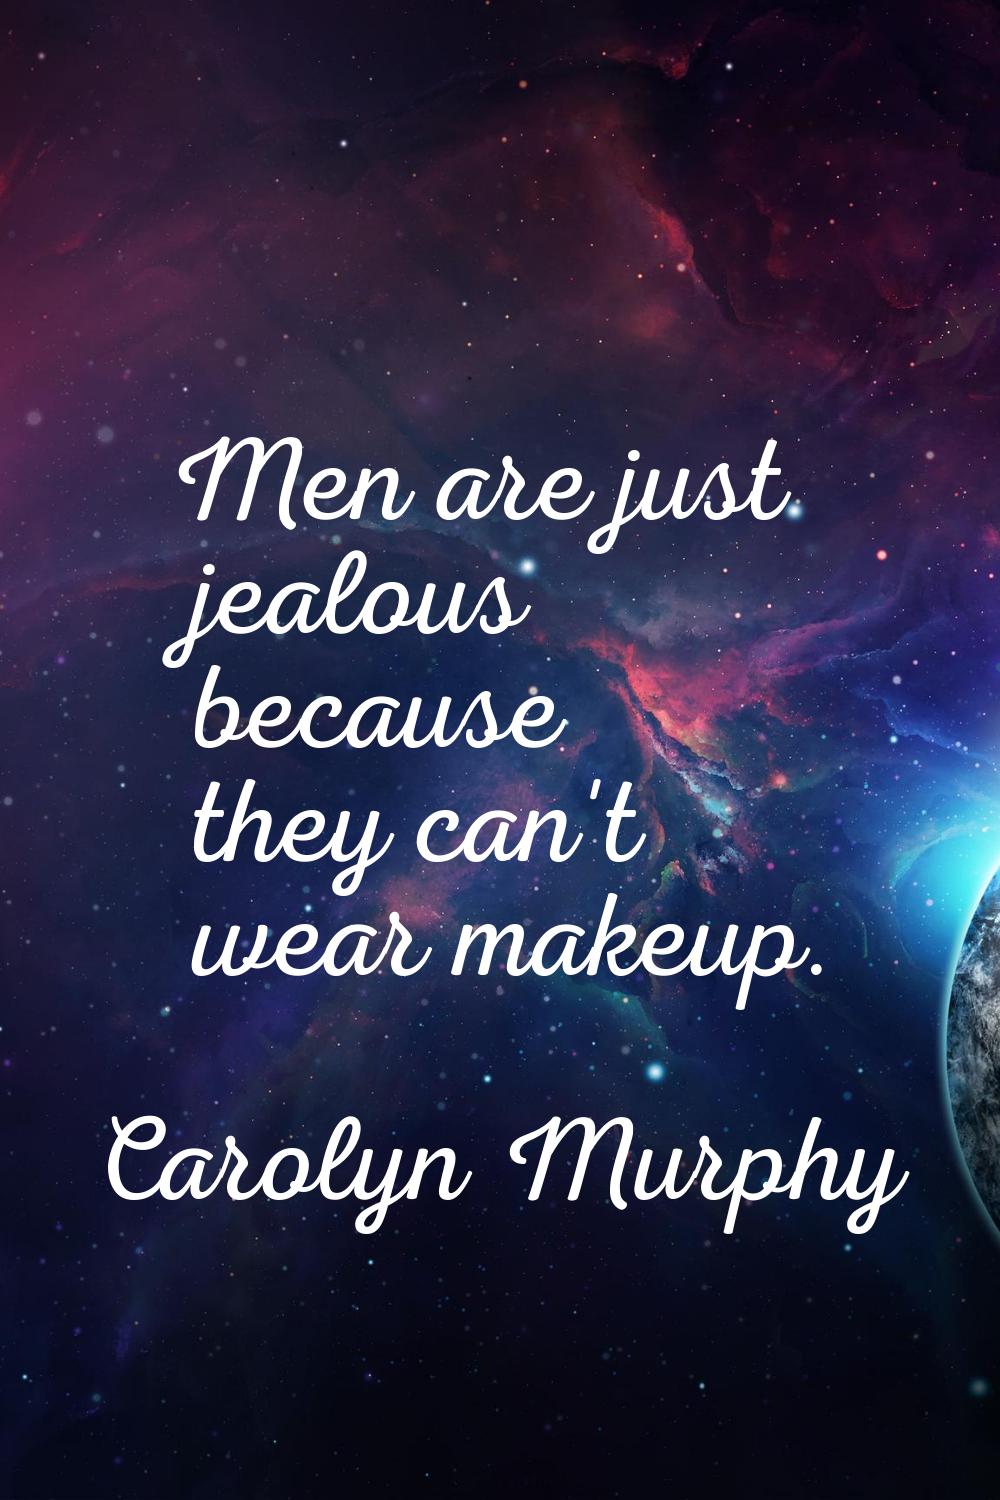 Men are just jealous because they can't wear makeup.